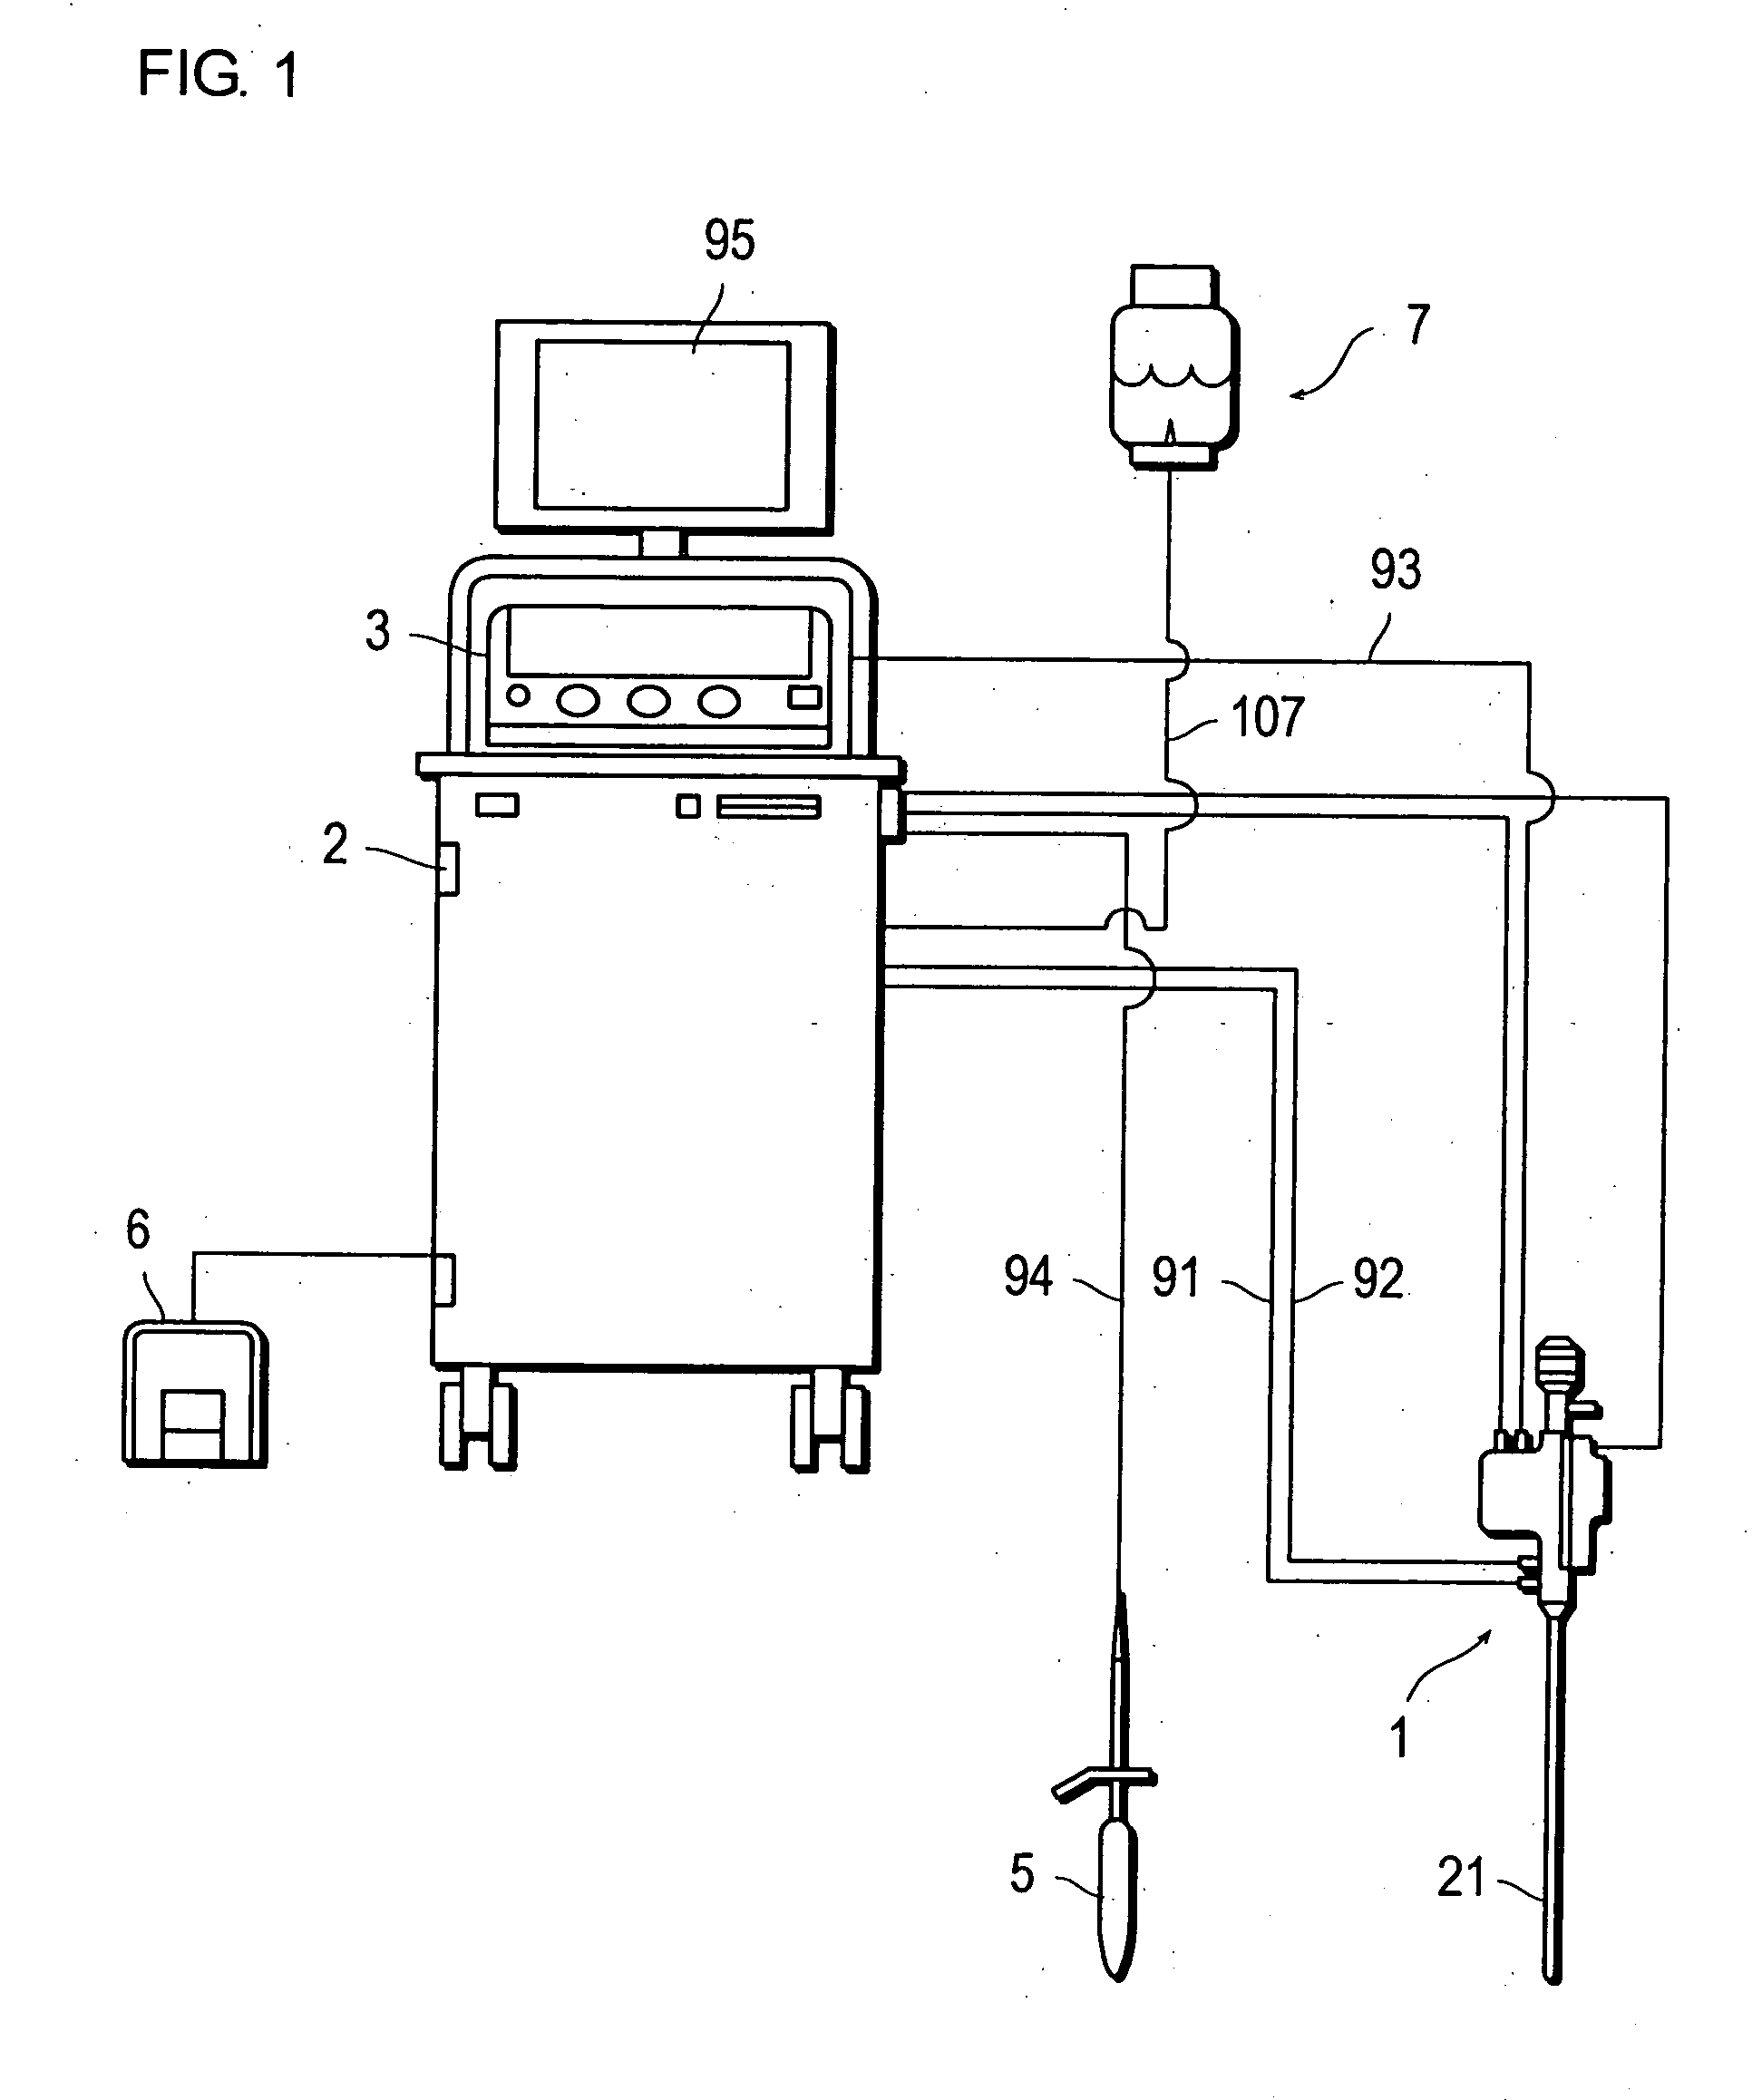 Apparatus and method for hyperthermia treatment